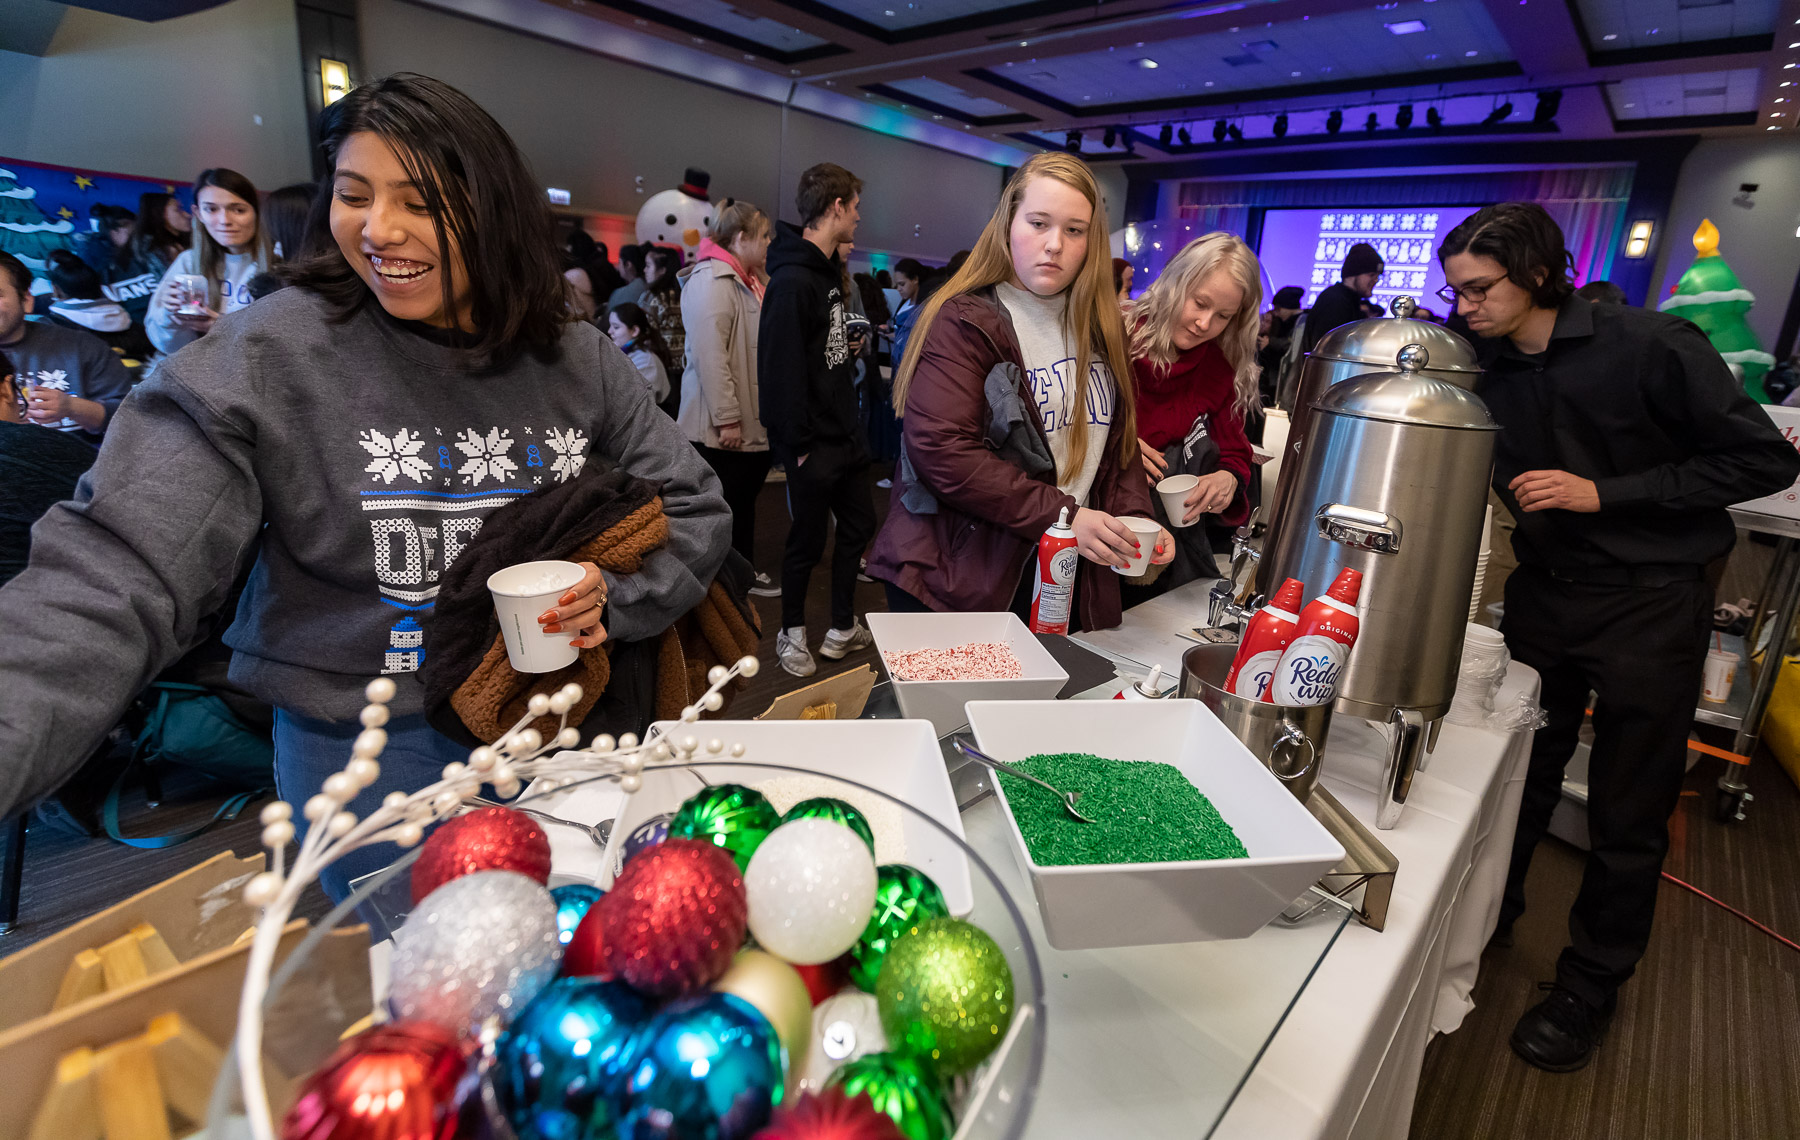 Students fill cups of hot cocoa with sweet treats. (DePaul University/Jeff Carrion)